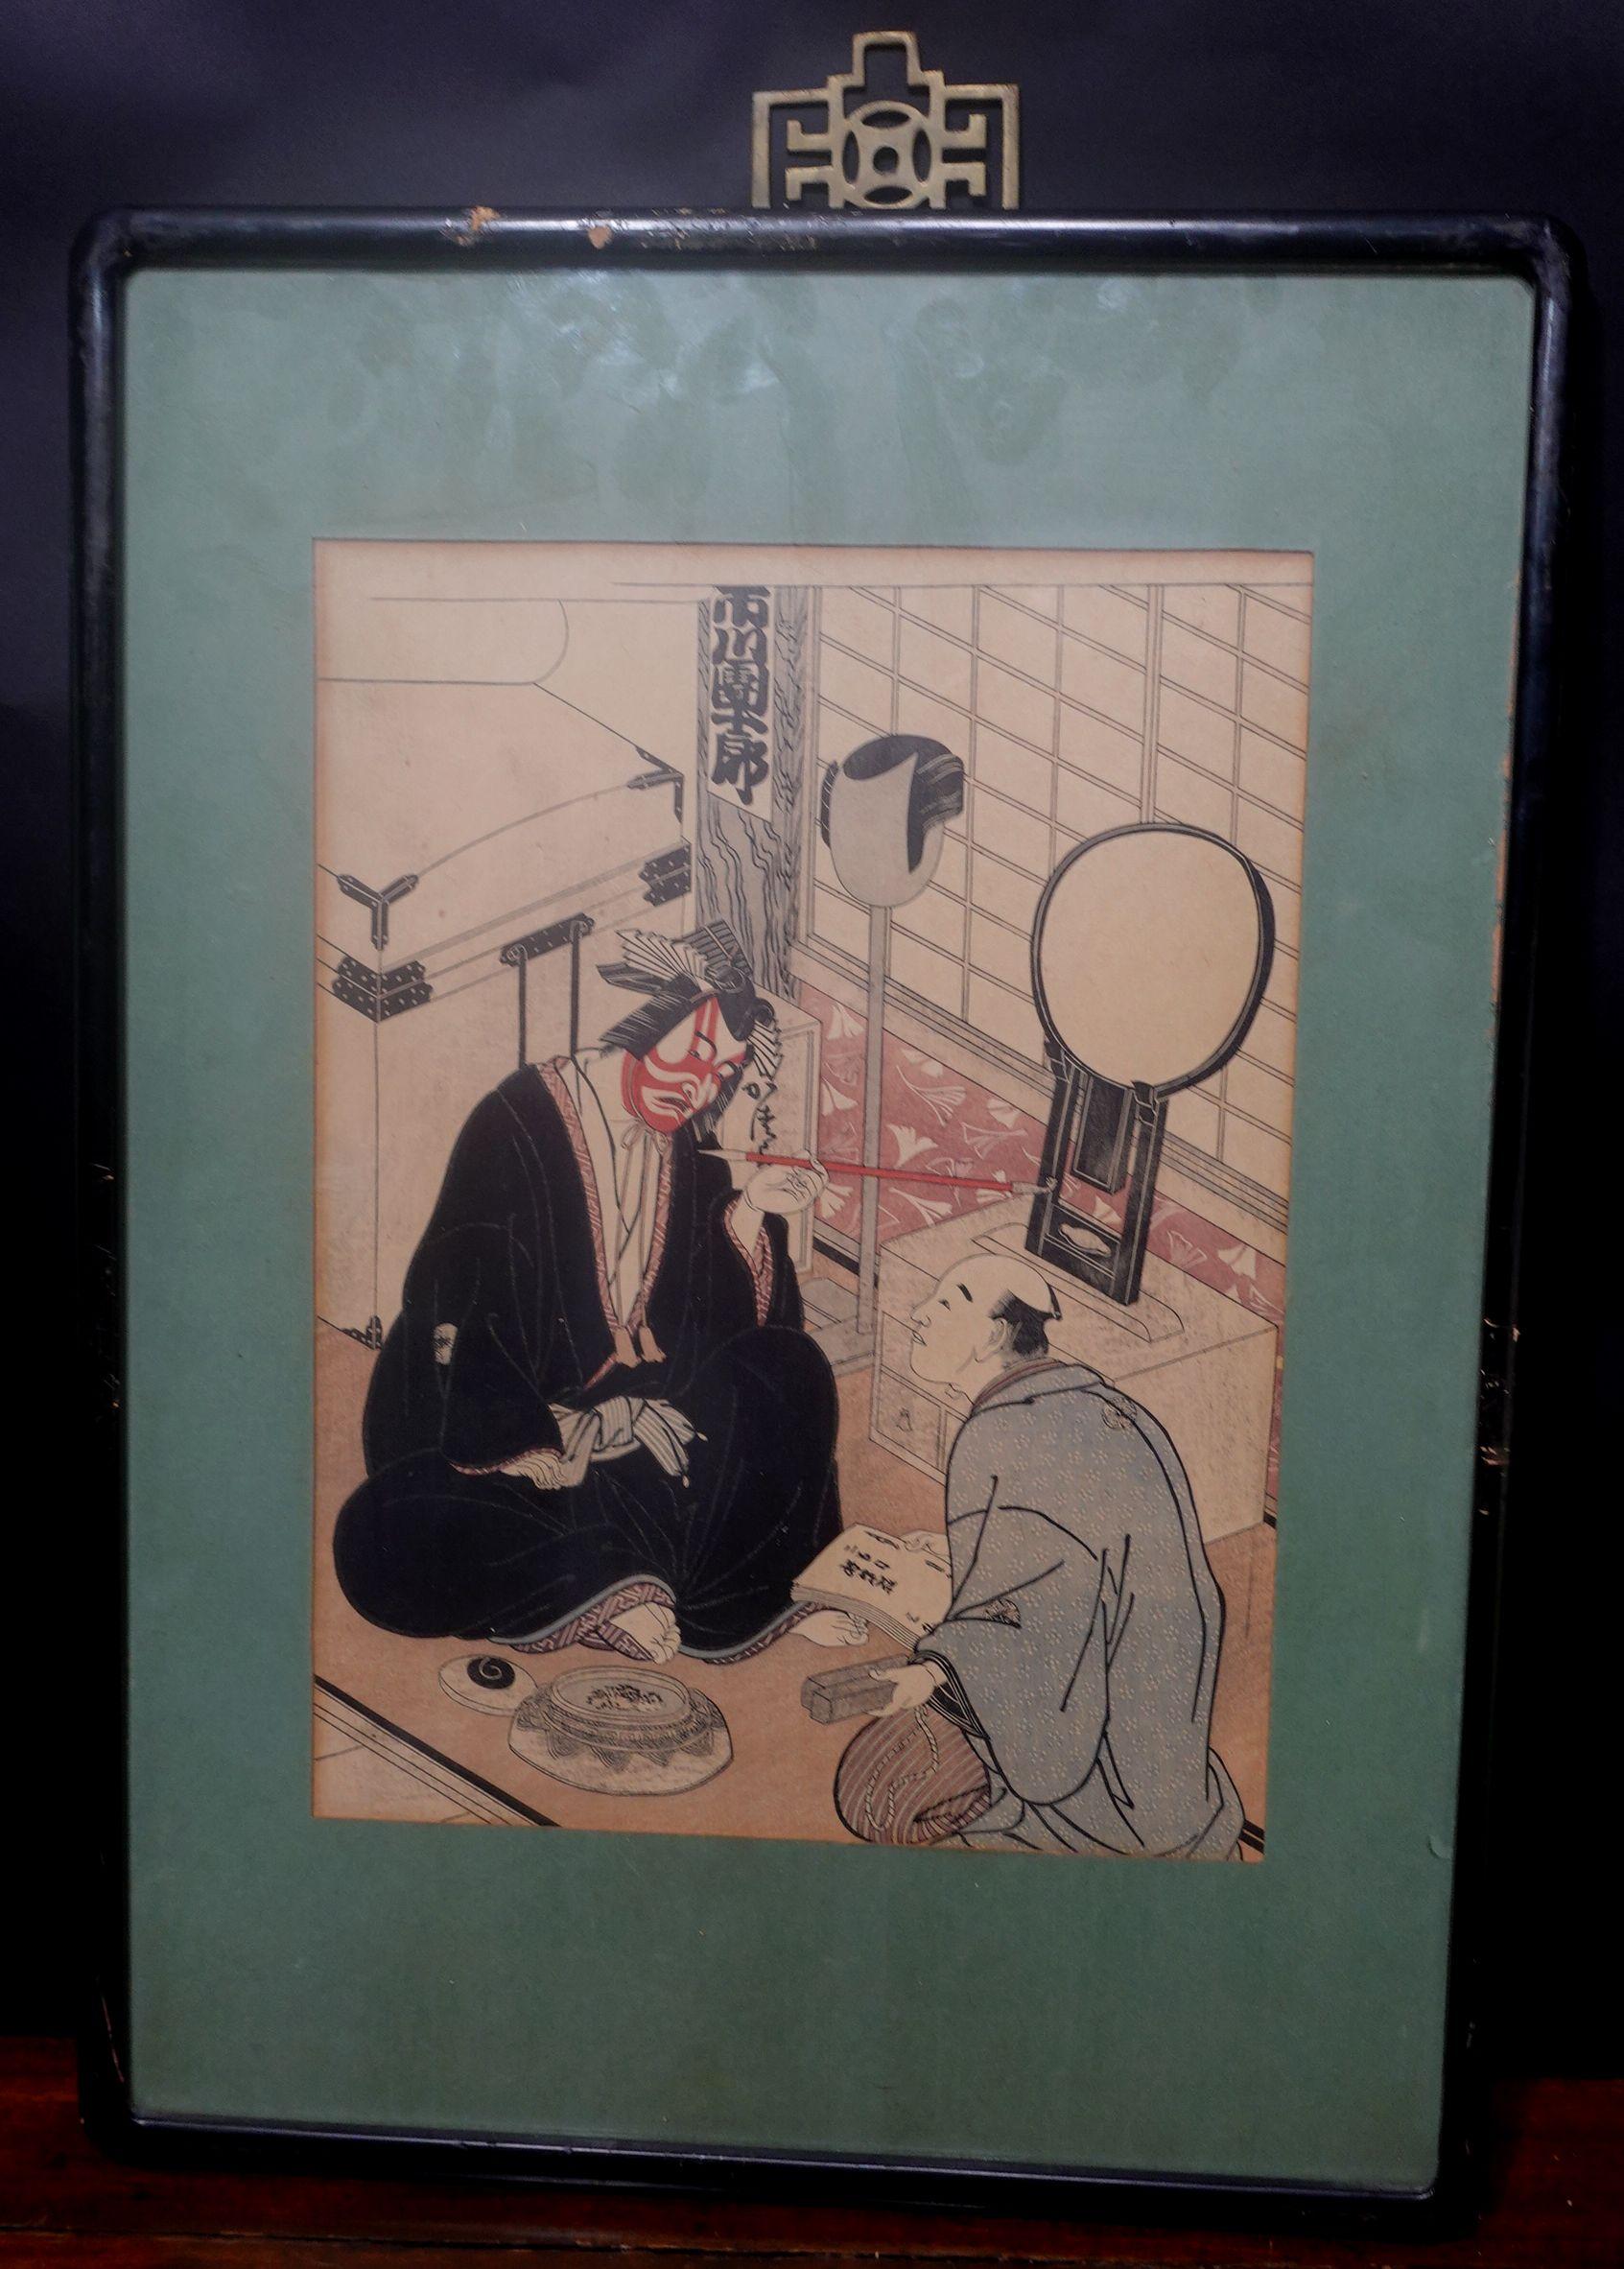 Katsukawa Shunsho, 勝川春章
This woodblock was published by Imperial Household Museum in 1947,
The Actor Ichikawa Danjuro ? in the Green Room Consulting with Scenario Writer
13